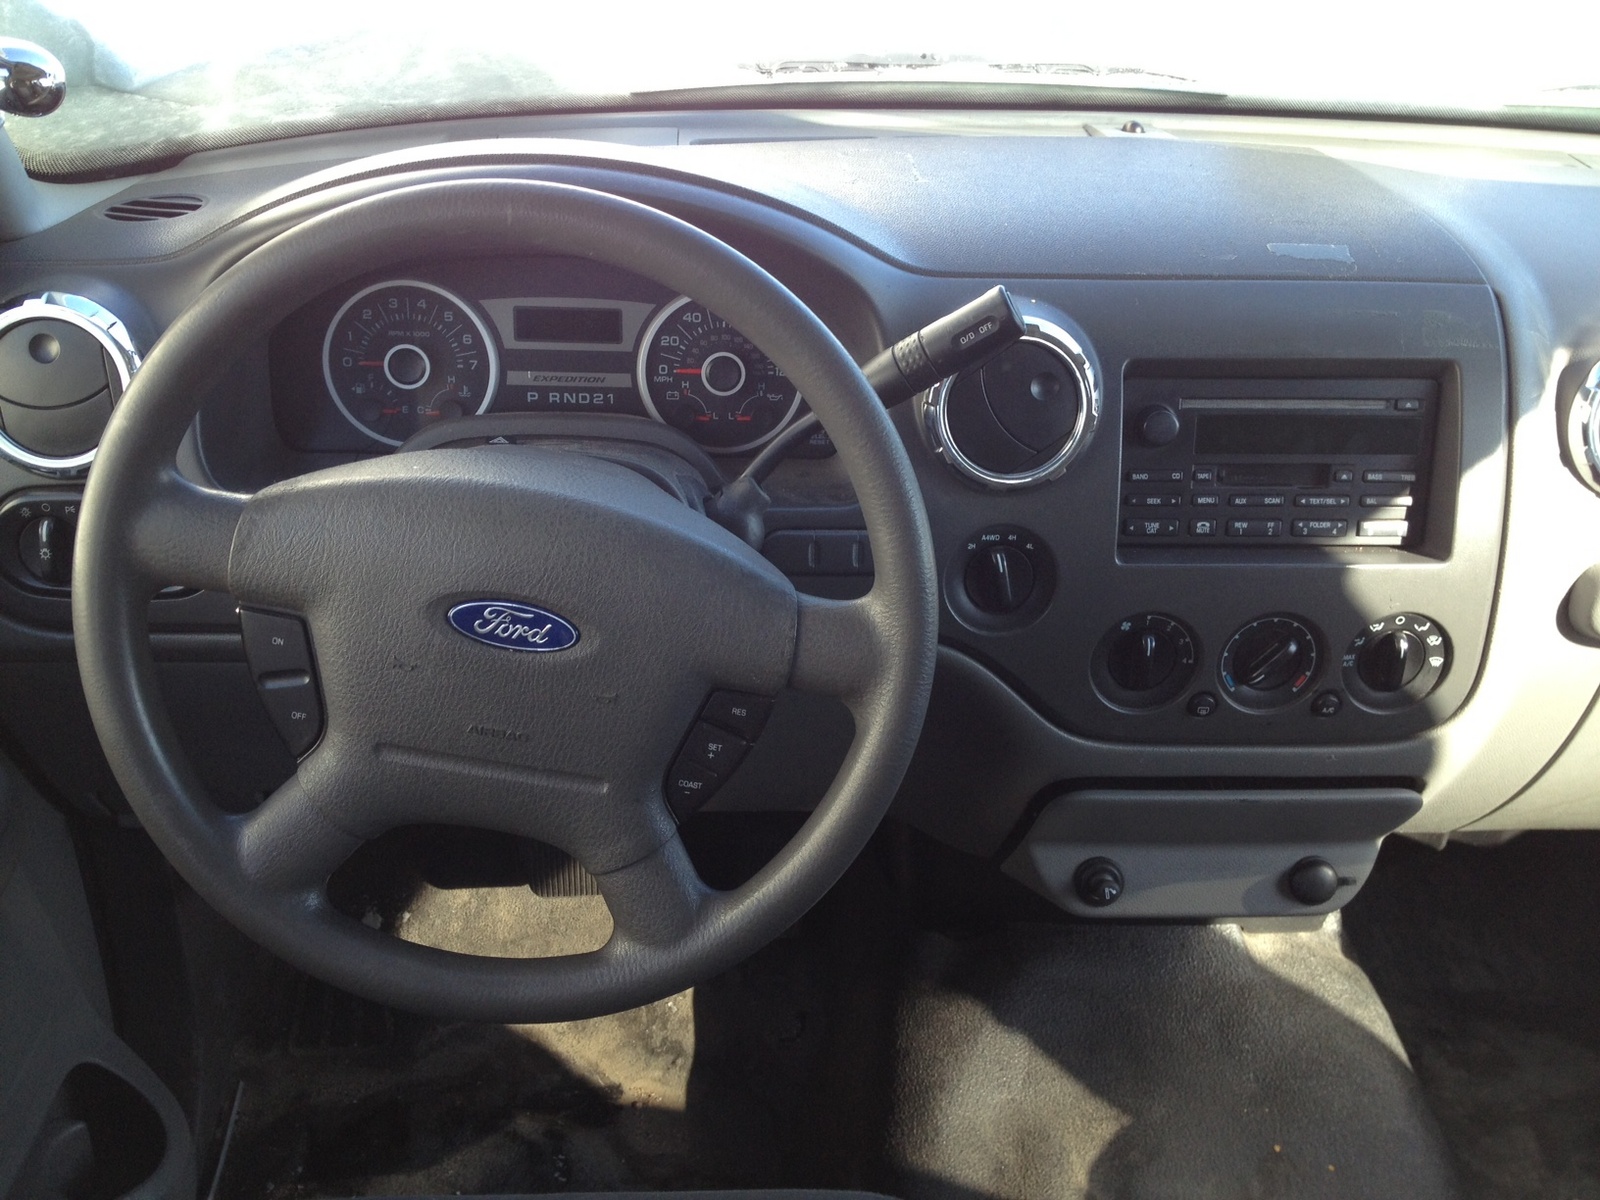 2005 Ford expedition interior pictures #5